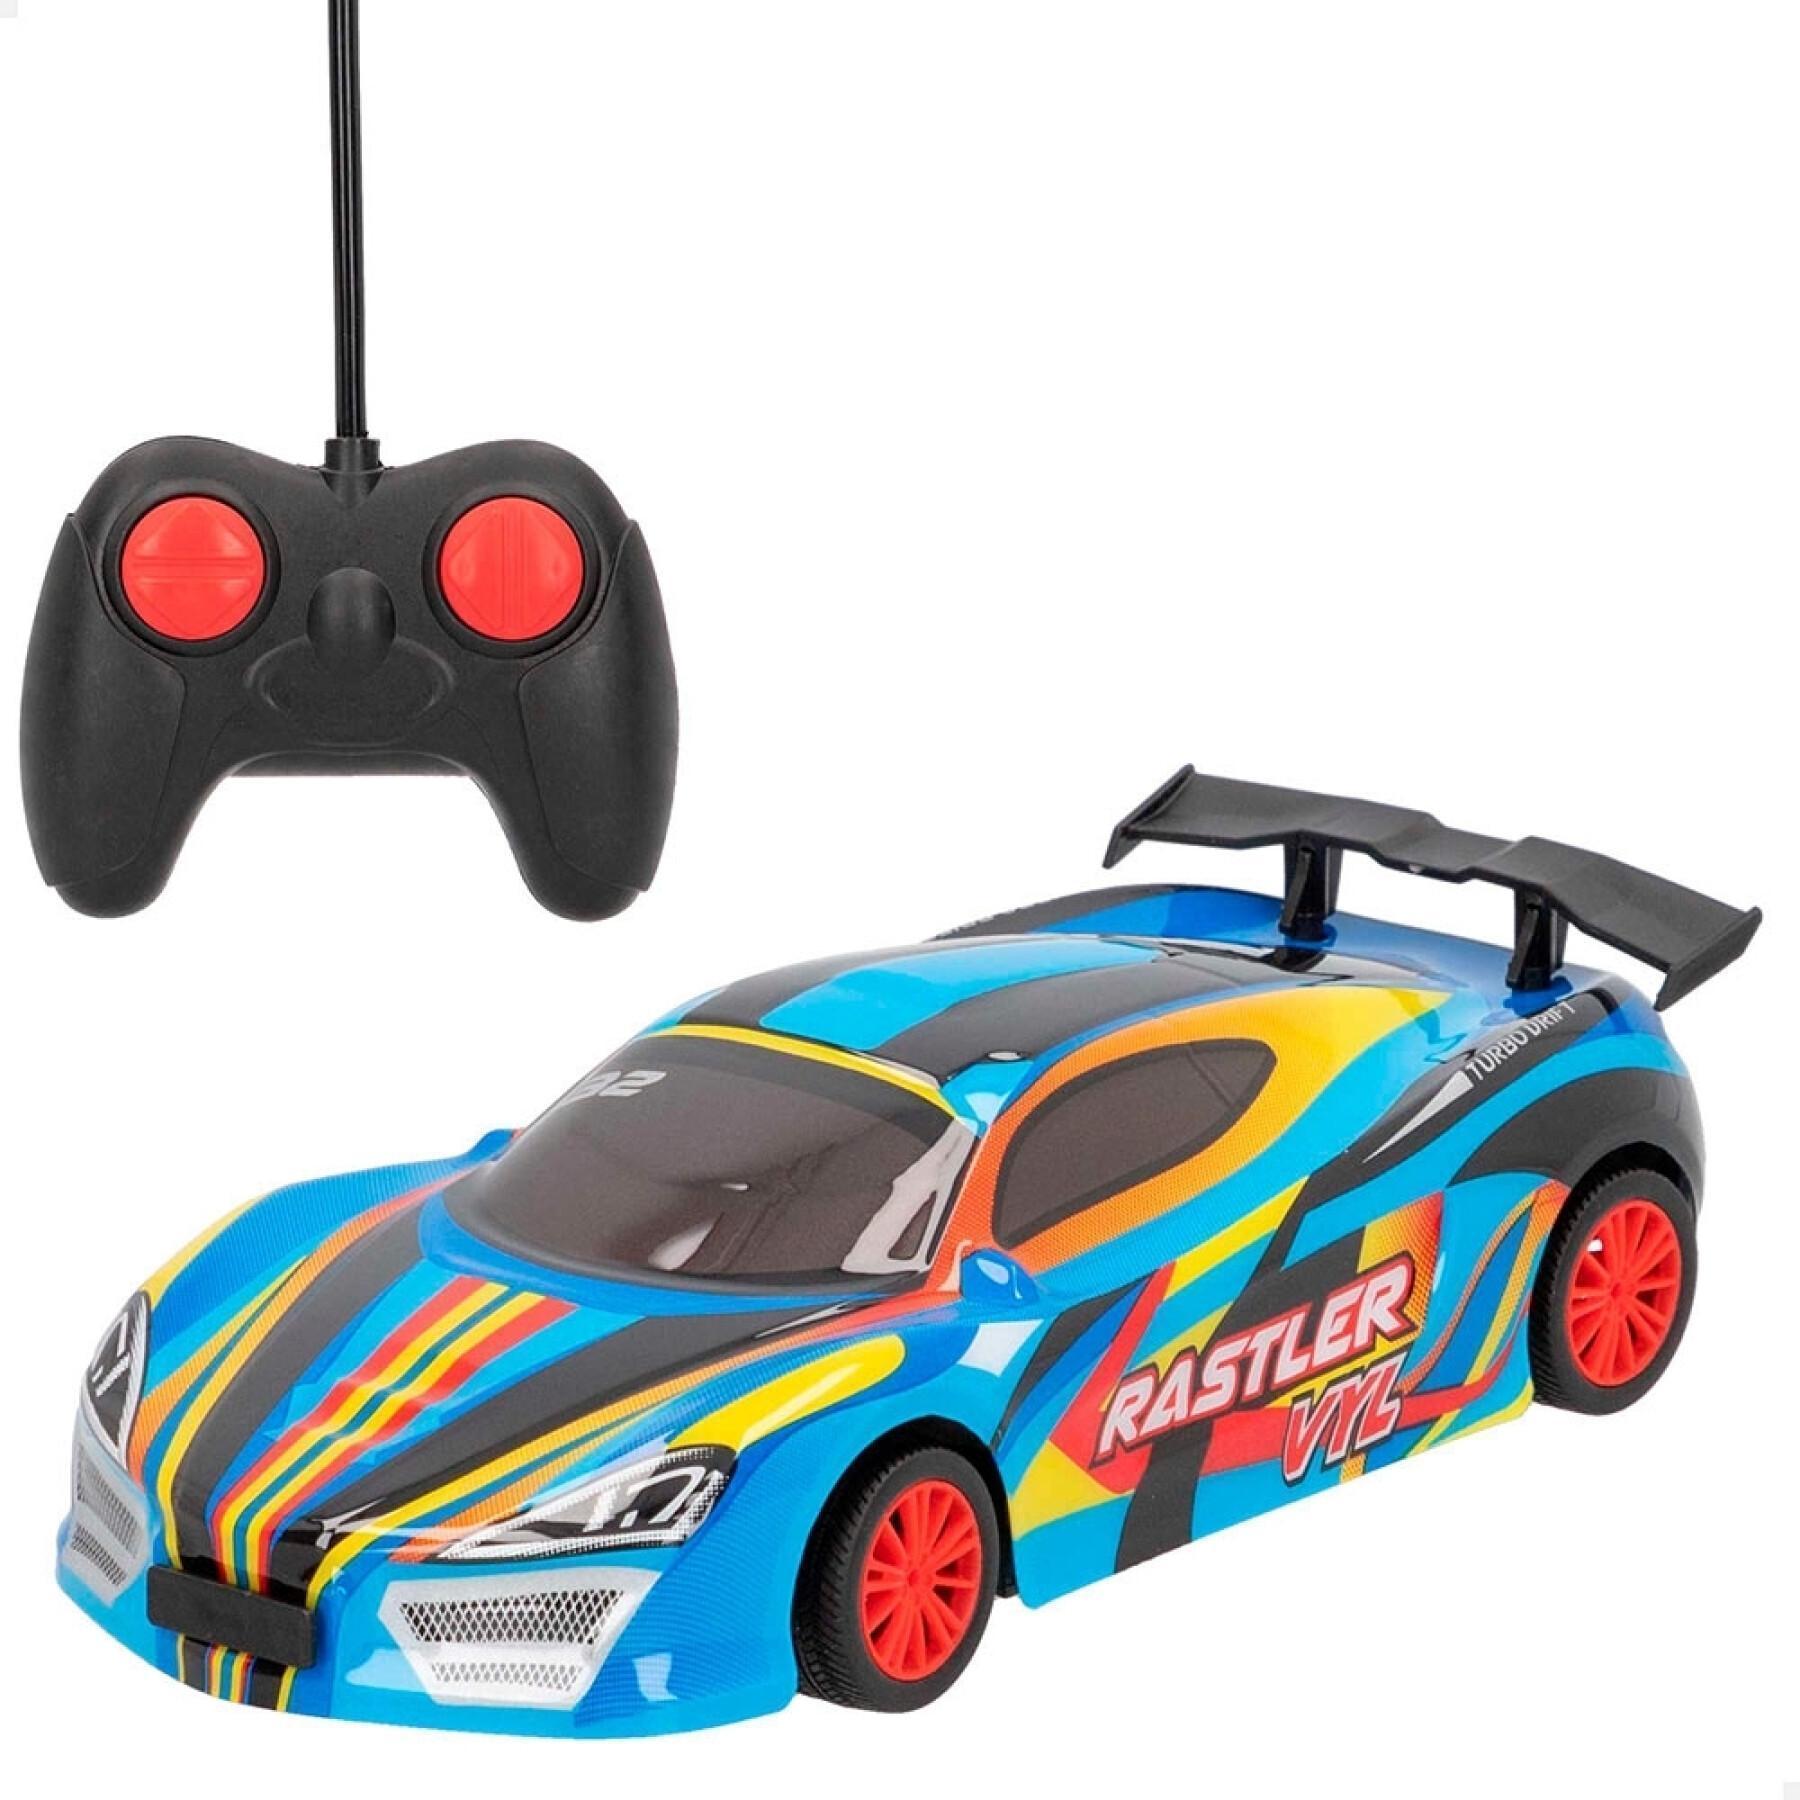 1:24 scale remote controlled car with lights Speed & Go